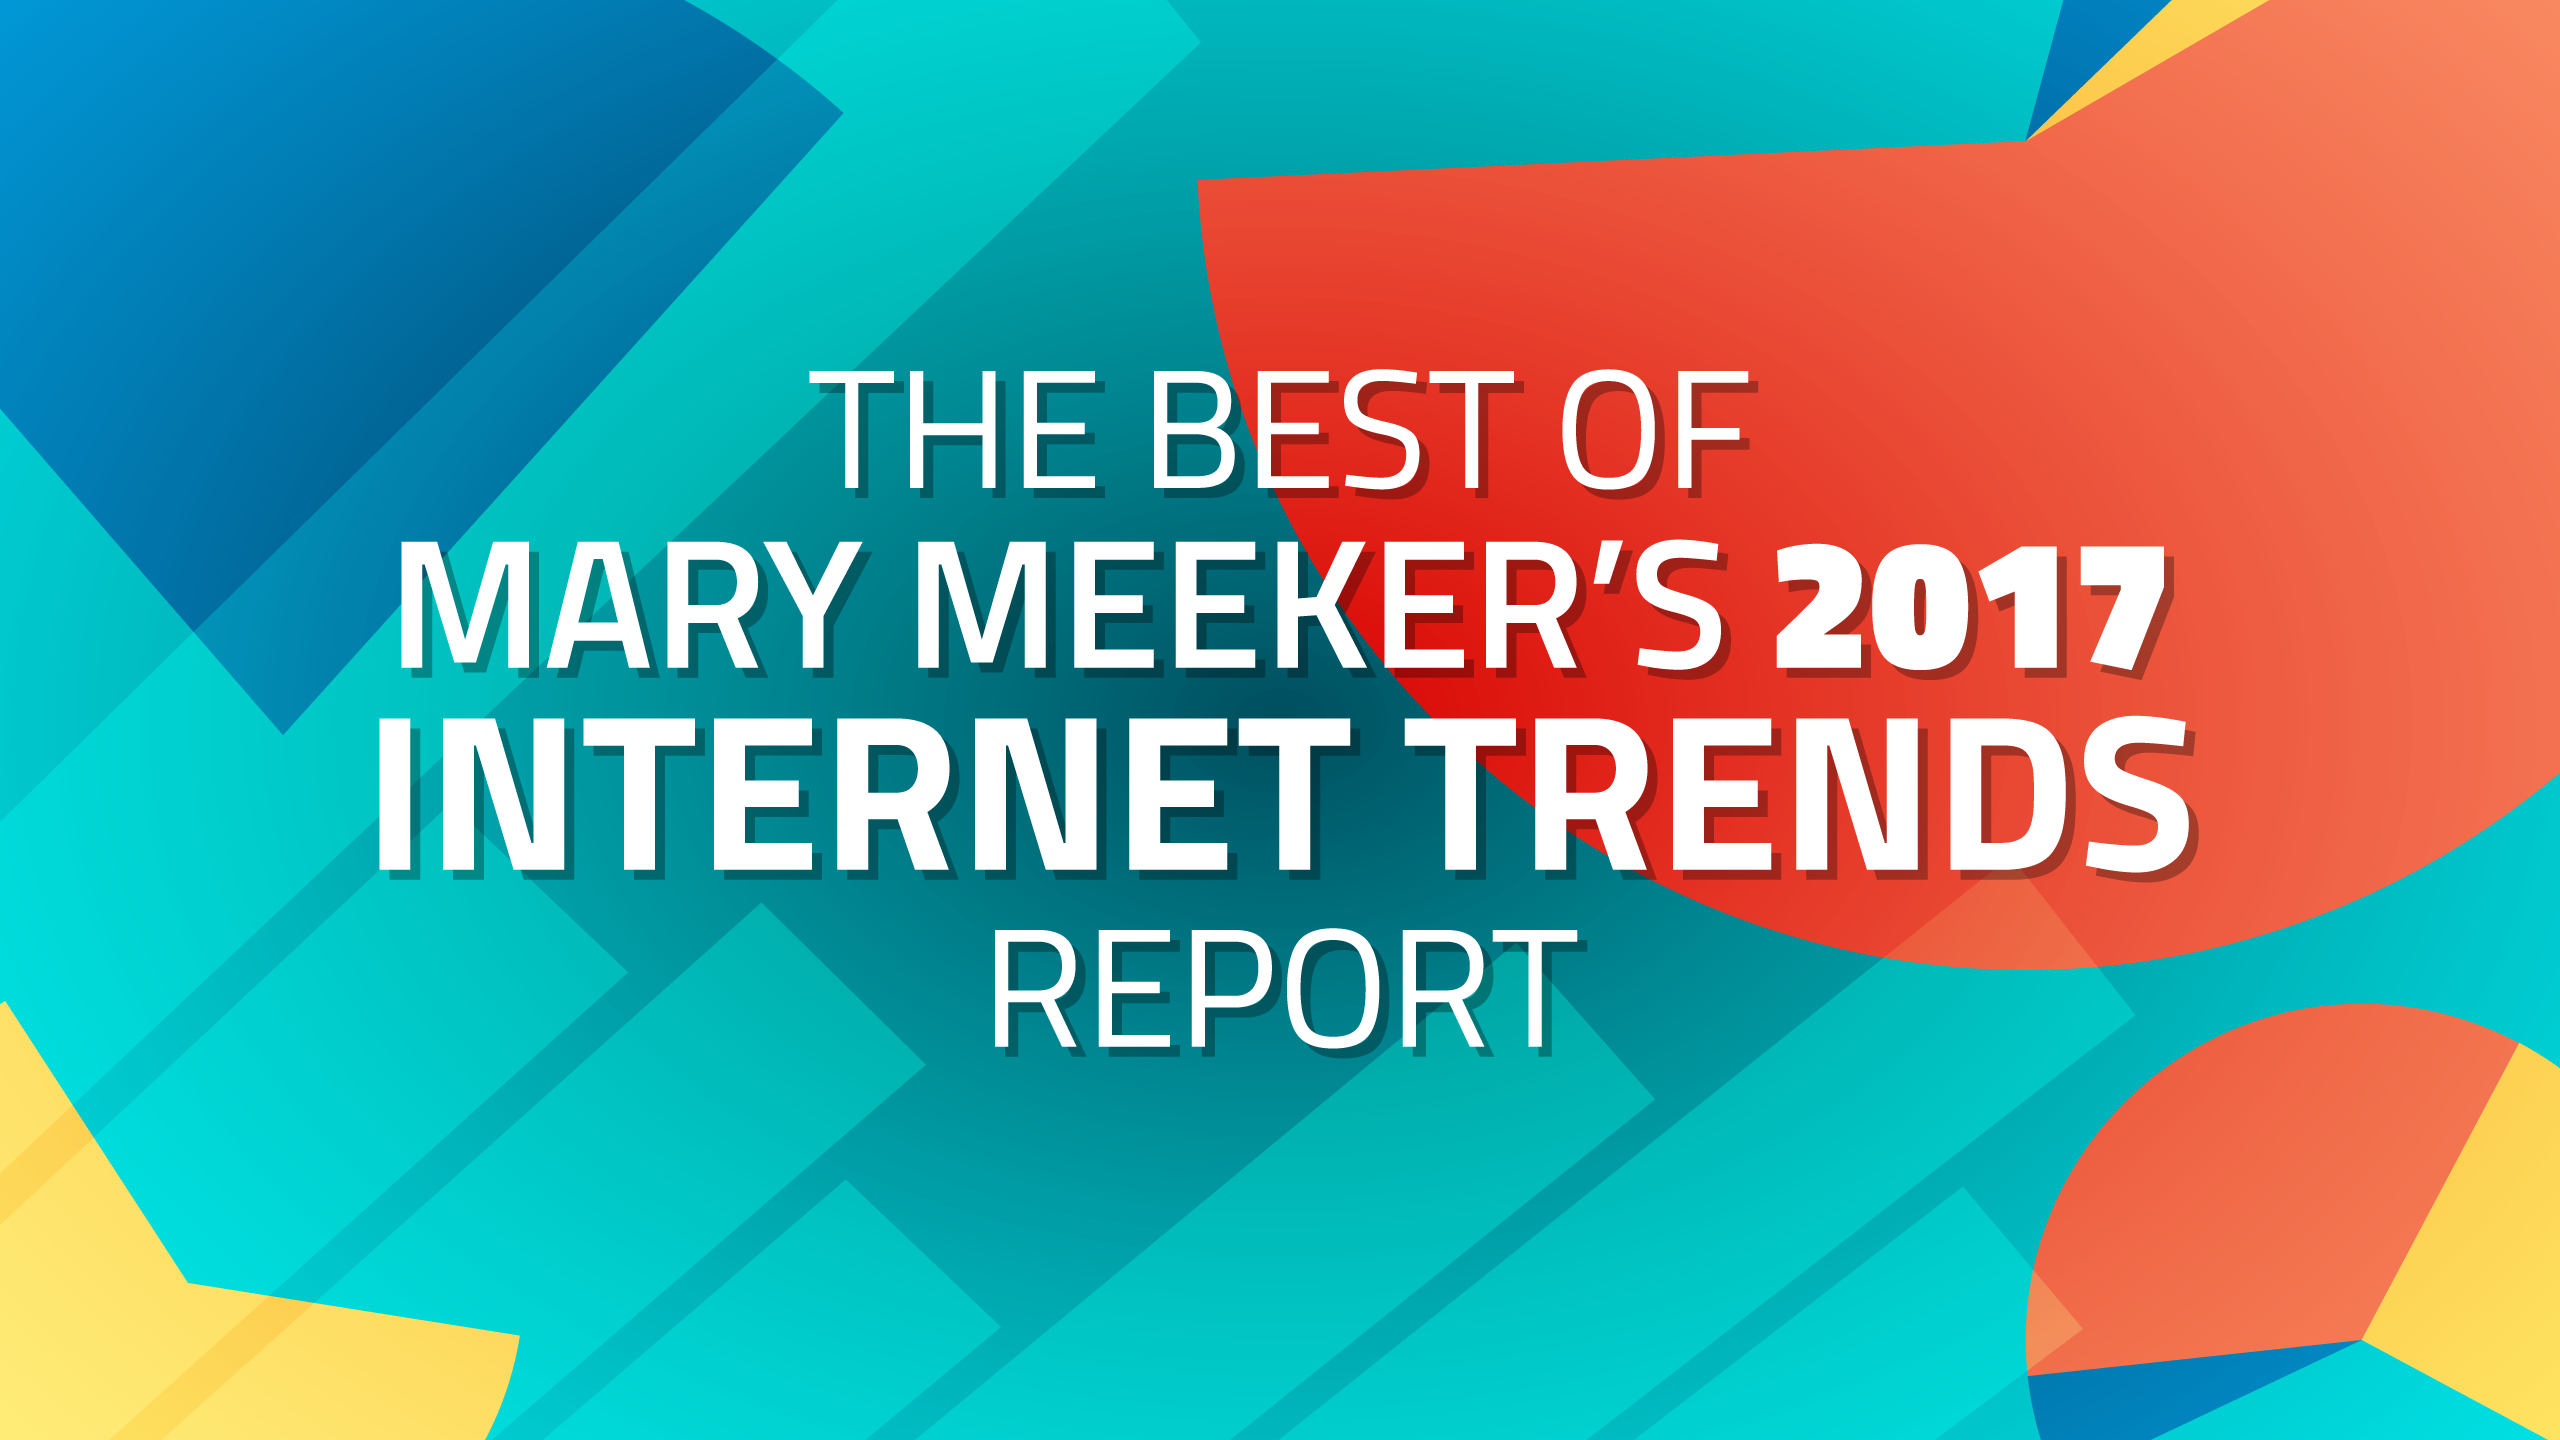 Mary meeker 2017 internet trends report